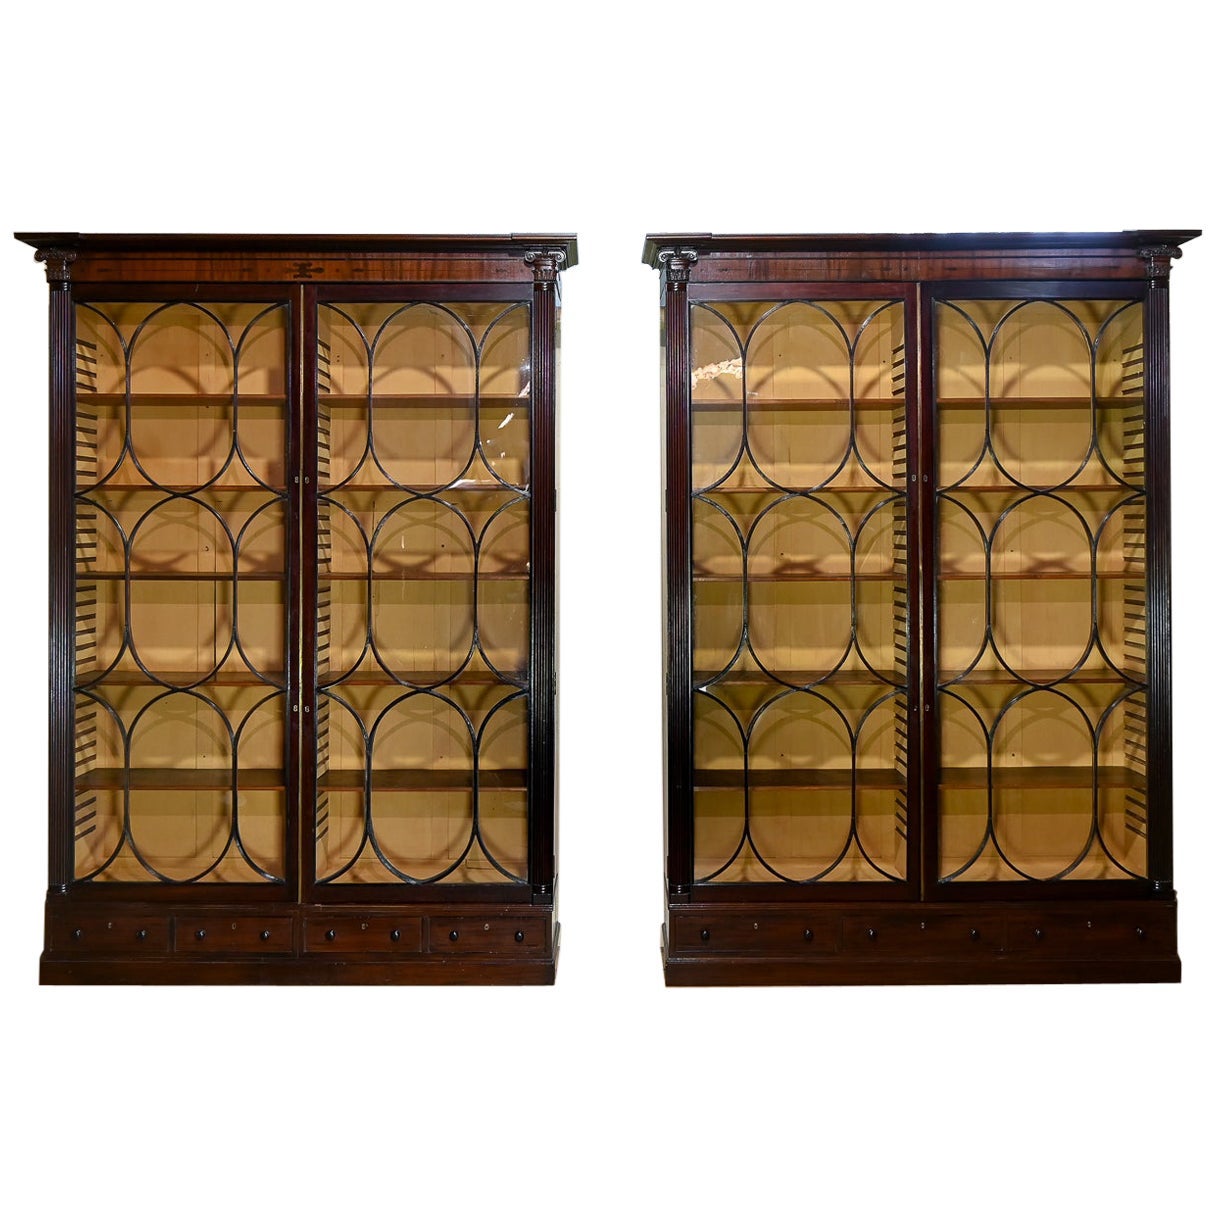 Pair of Monumental Regency Oval Astral Glazed Mahogany Library Bookcases, c.1810 For Sale